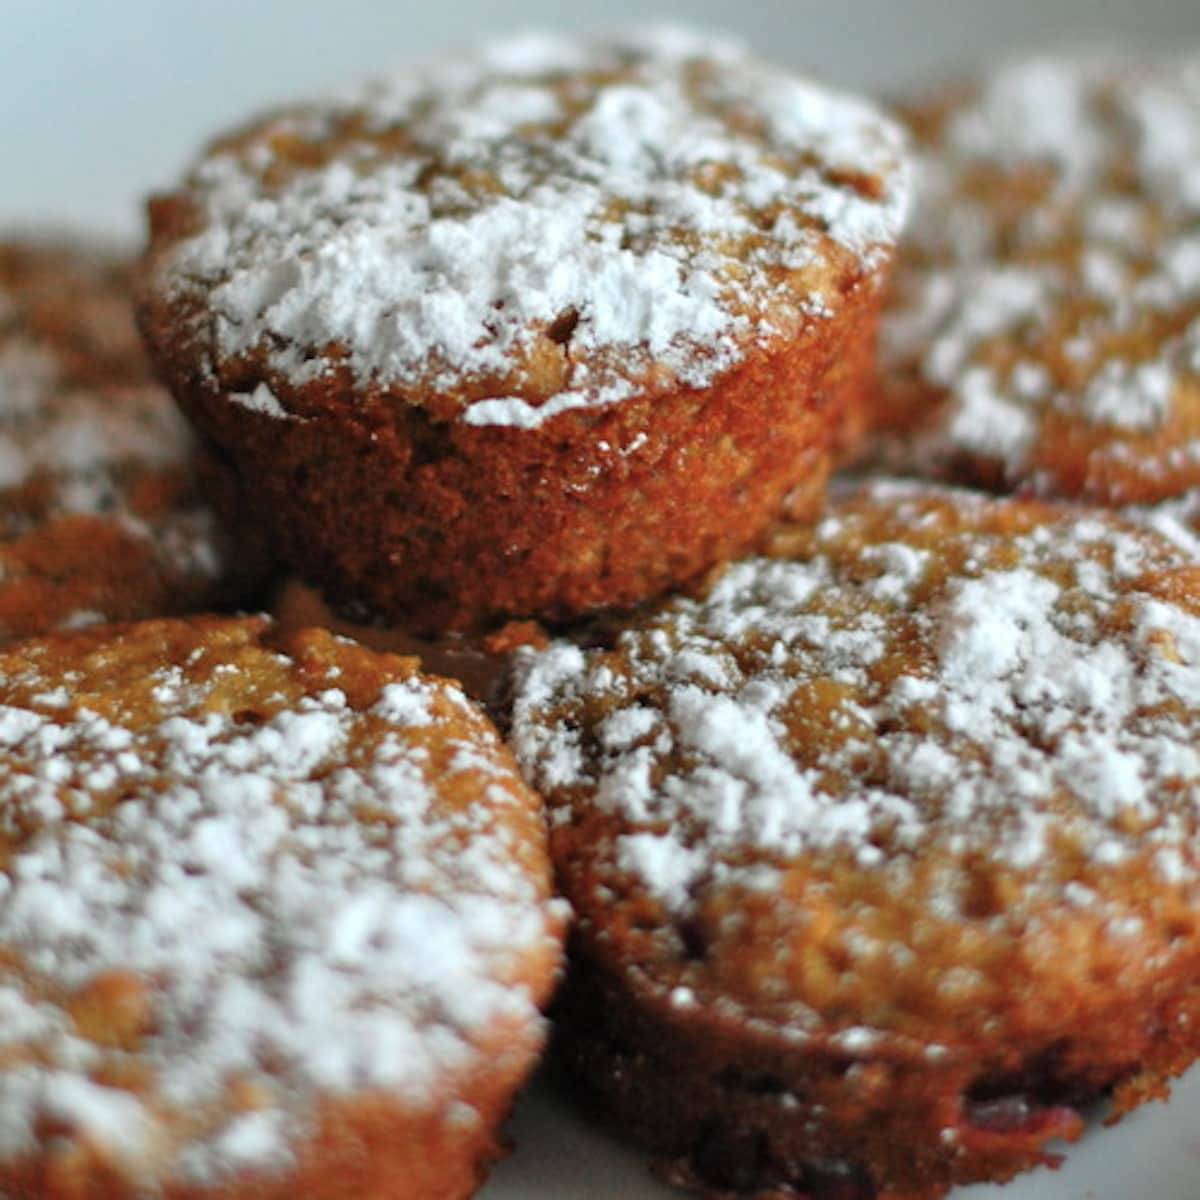 A stack of pomegranate orange muffins with powdered sugar topping.